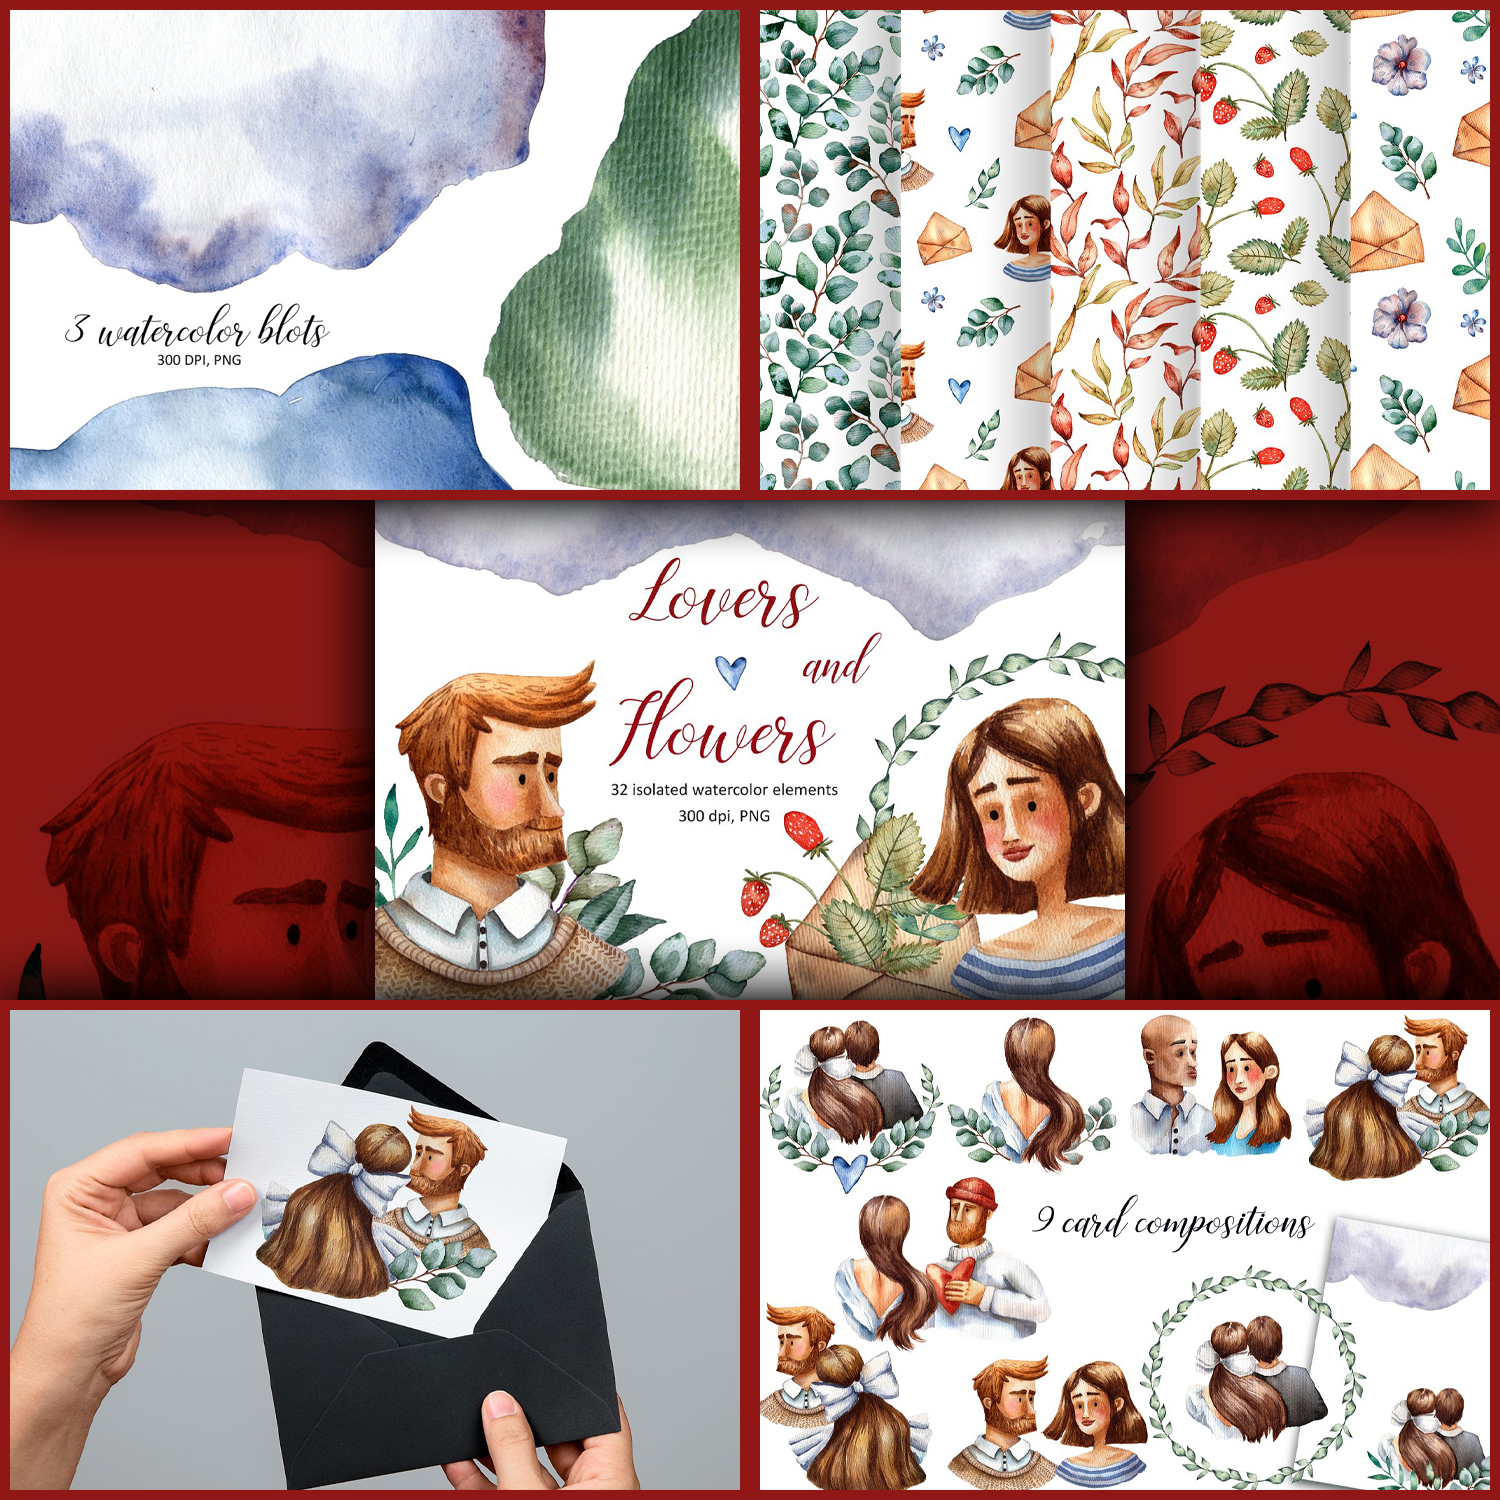 Illustration lovers and flowers watercolor set.